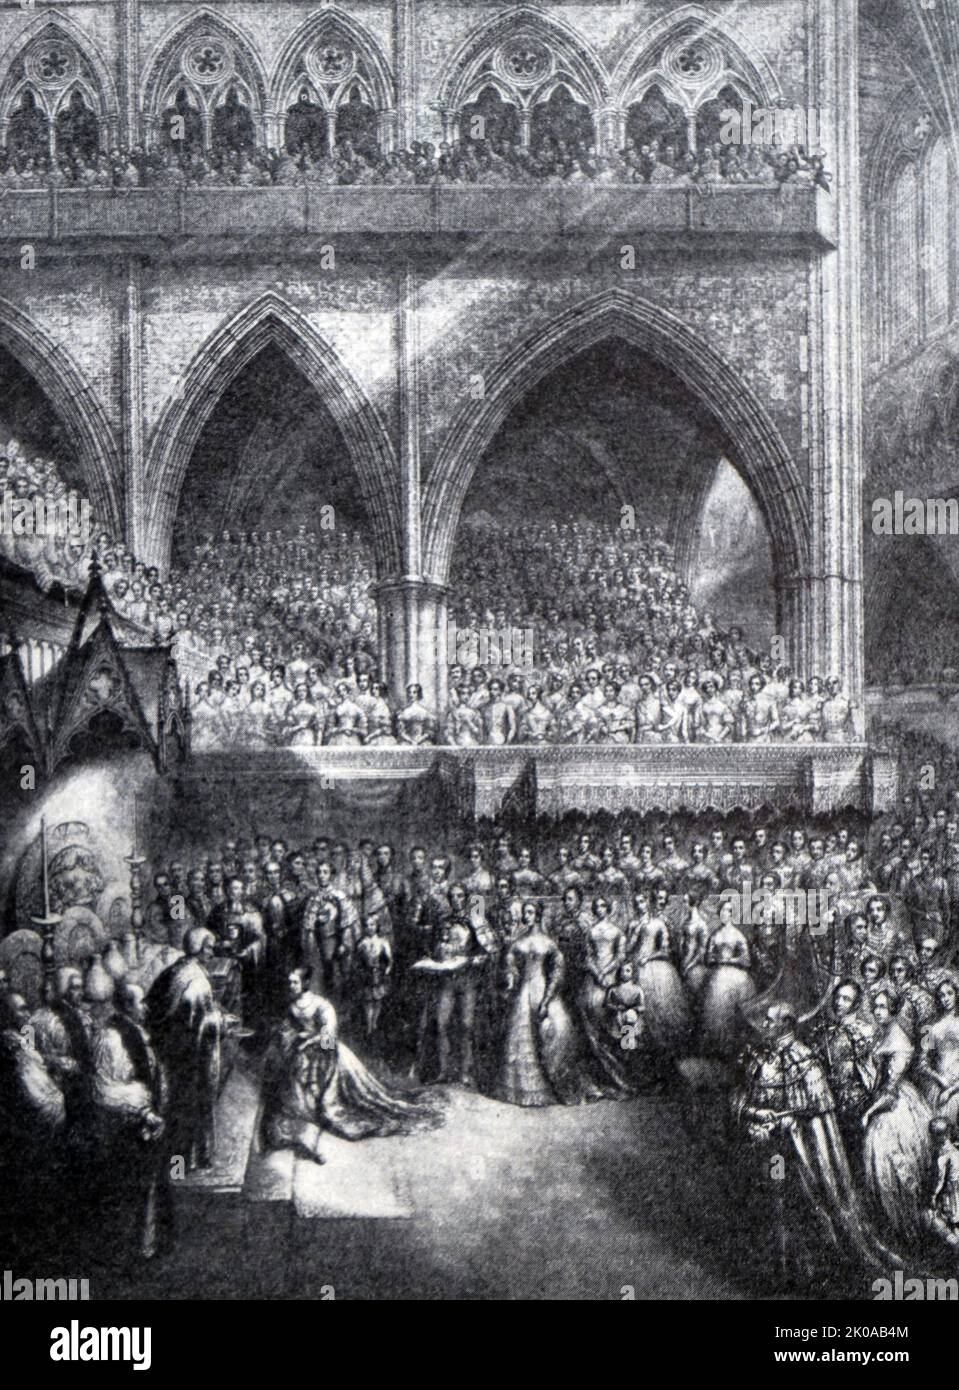 Coronation of Queen Victoria, 1838. The Queen receiving Holy Communion. Drawing. Victoria (Alexandrina Victoria; 24 May 1819 - 22 January 1901) was Queen of the United Kingdom of Great Britain and Ireland from 20 June 1837 until her death in 1901 Stock Photo